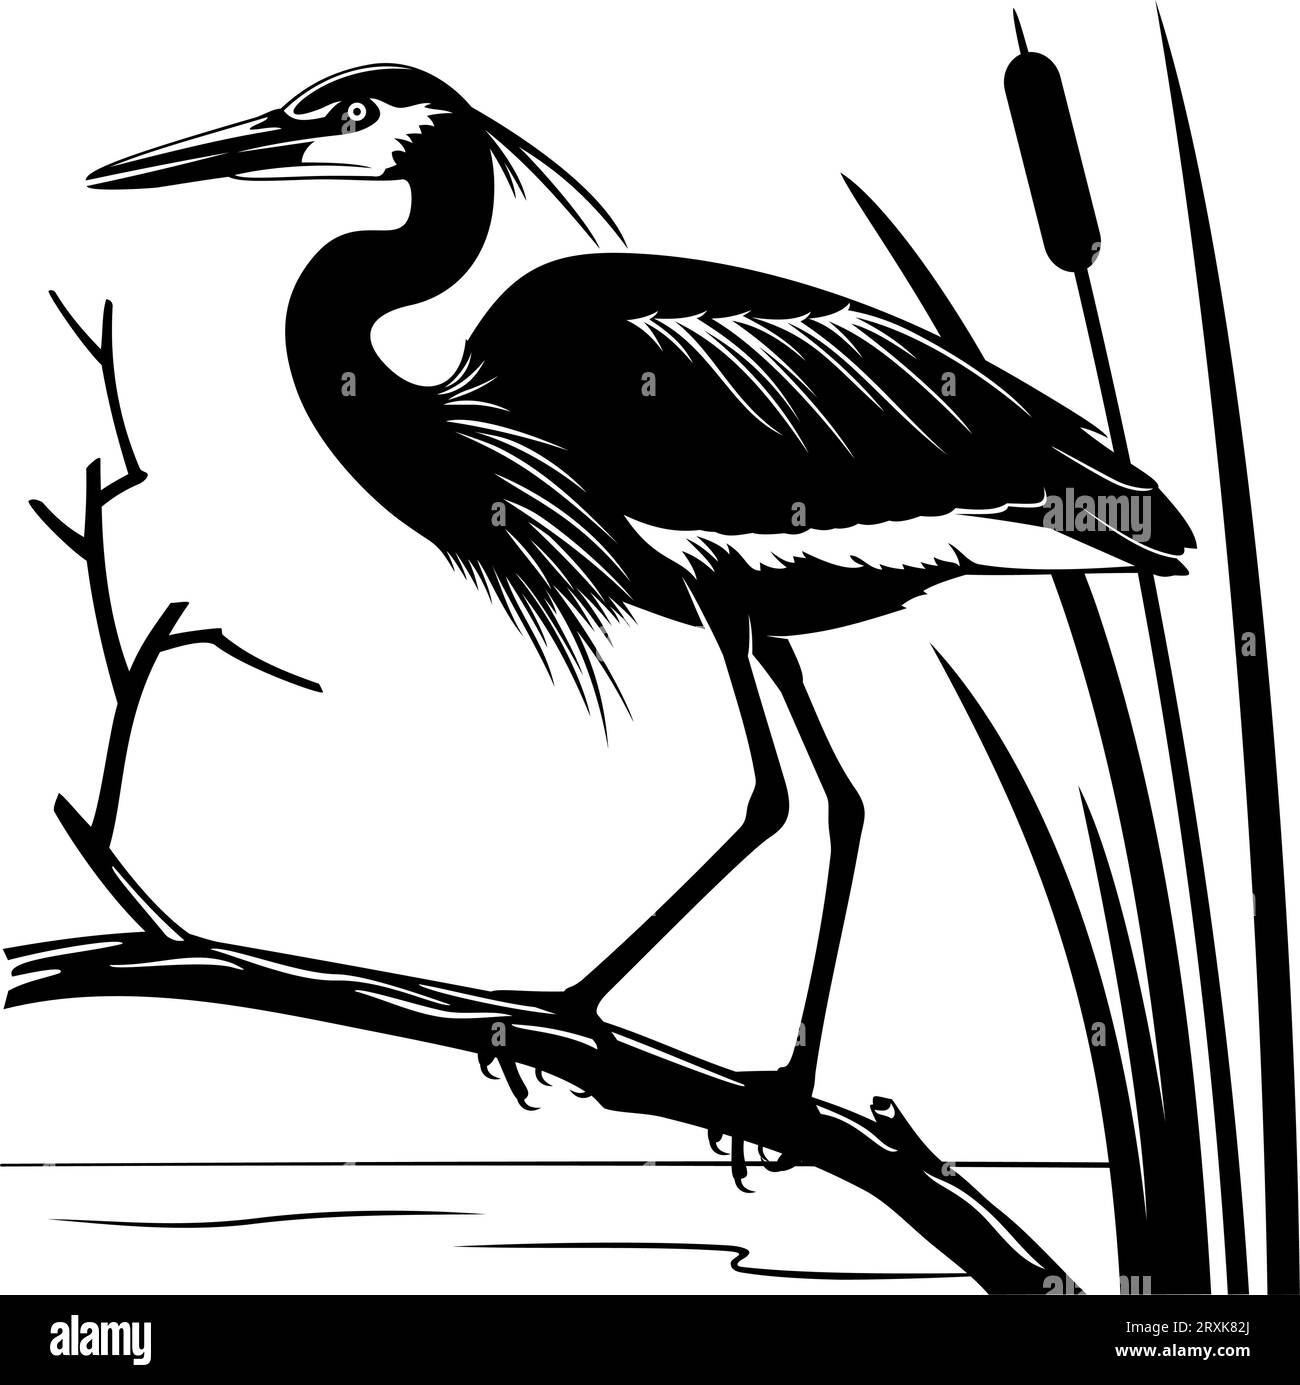 Silhouette of Heron standing on a branch. Black and white stencil vector illustration. Bird, branch, reeds and water are separate objects. Stock Vector